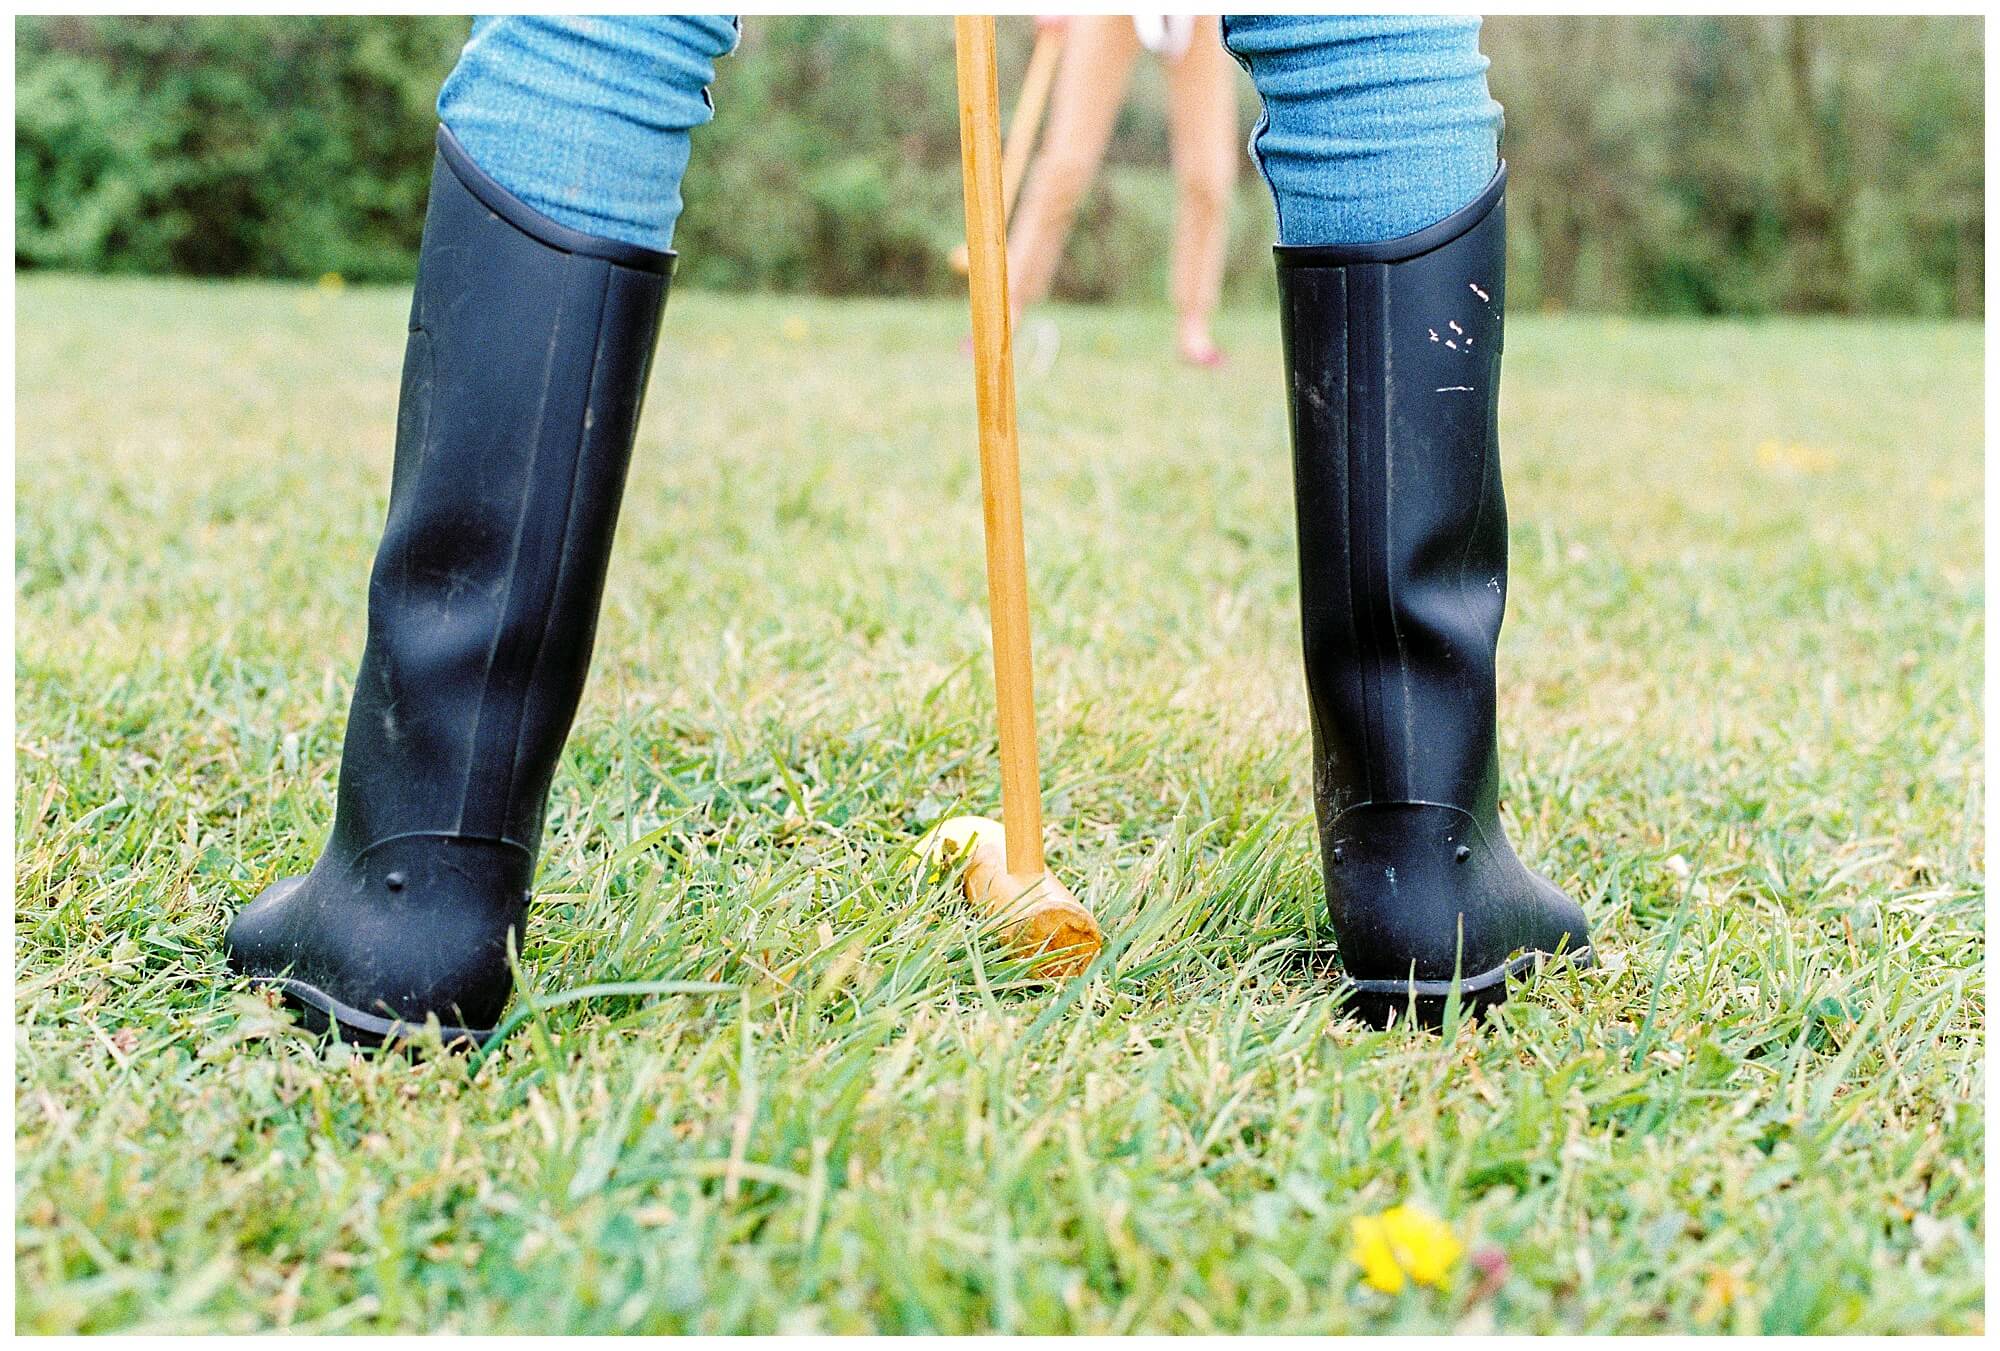 A child prepares to swing his croquet mallet during a match.